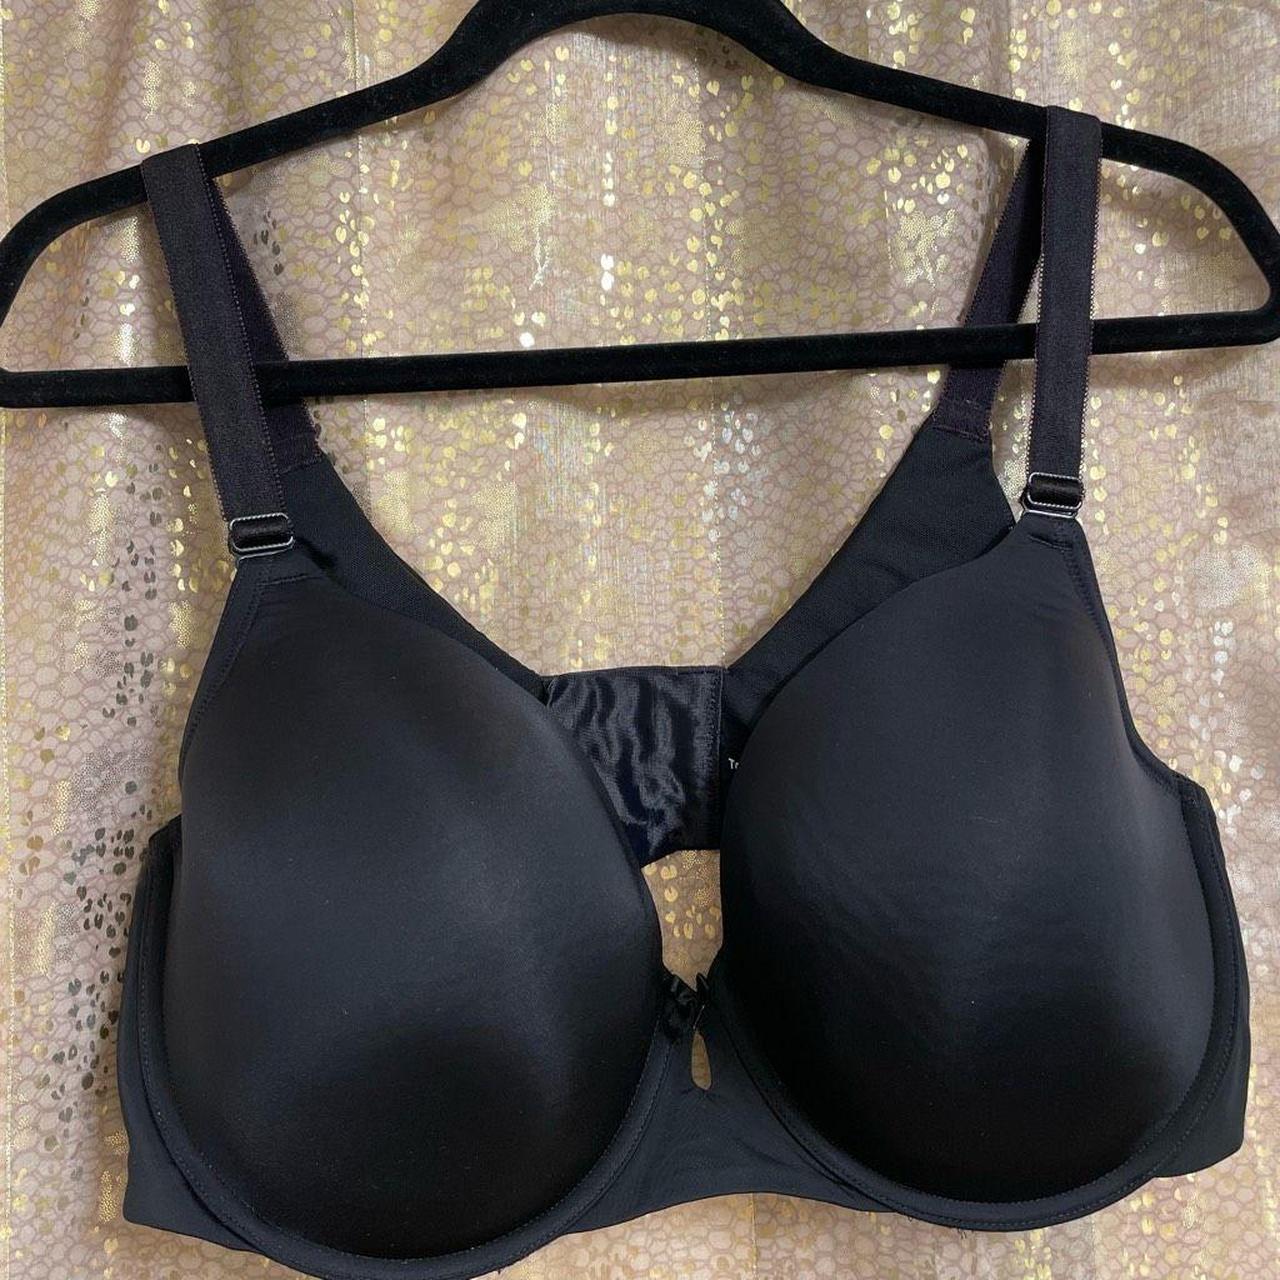 Trying On Torrid's Curve Collection Bras